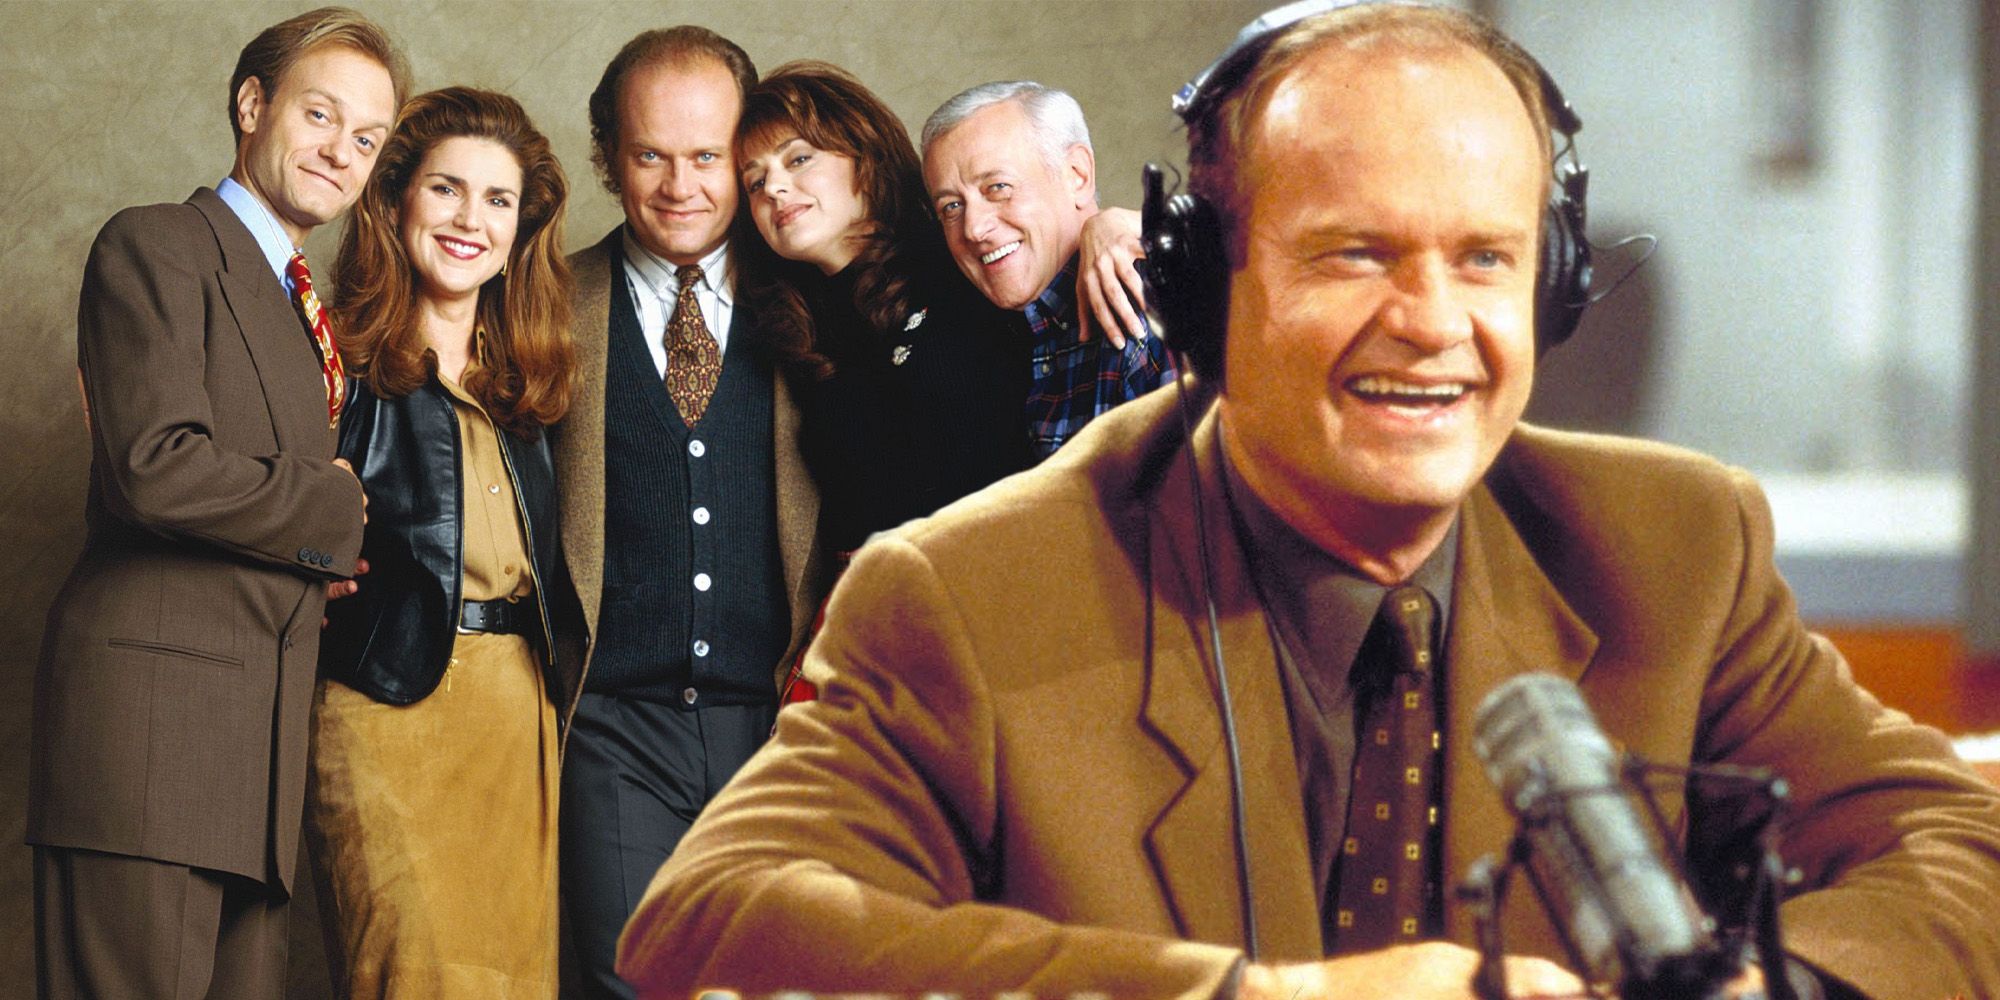 Frasier doing talk show with cast in the background